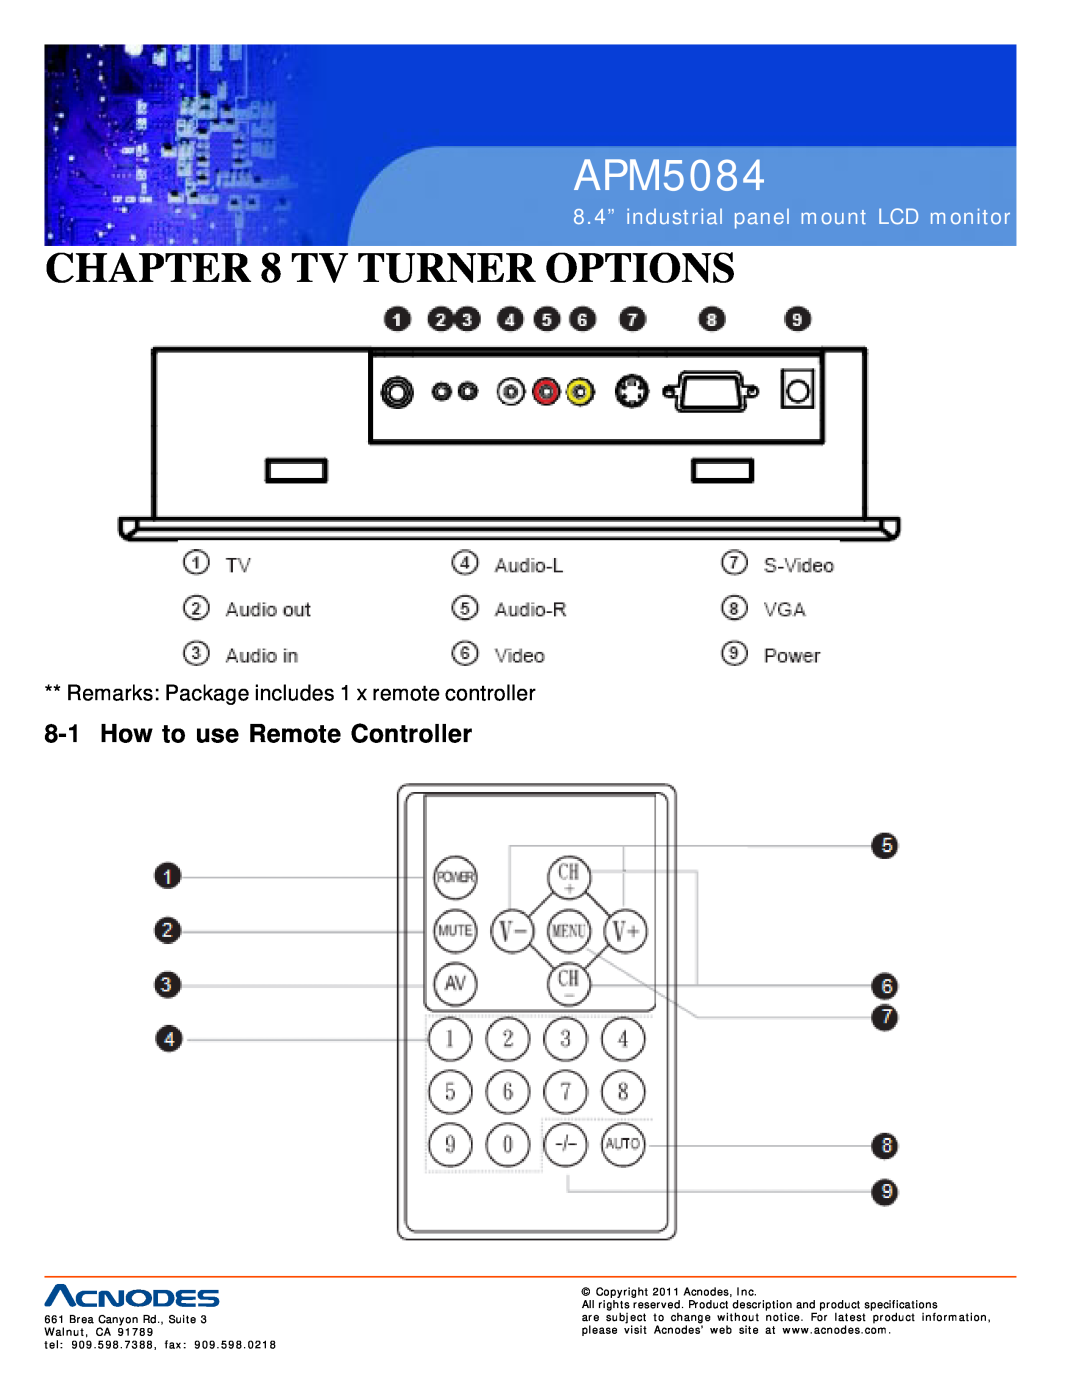 Acnodes APM5084 user manual Tv Turner Options, 8.4” industrial panel mount LCD monitor, Copyright 2011 Acnodes, Inc 